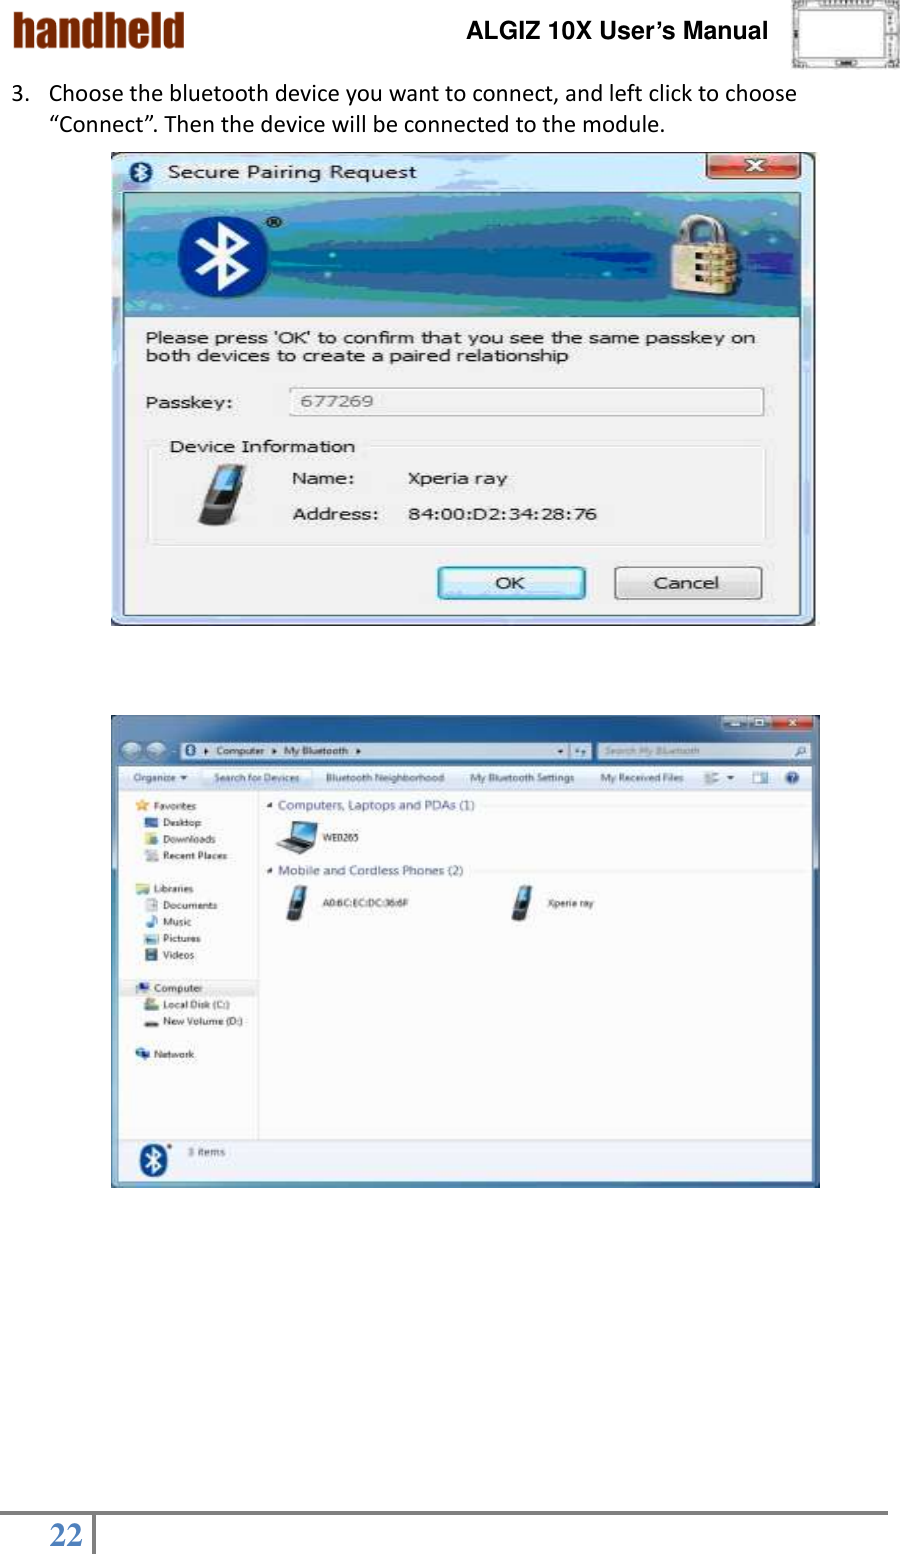 ALGIZ 10X User’s Manual    22   3. Choose the bluetooth device you want to connect, and left click to choose “Connect”. Then the device will be connected to the module.                                     